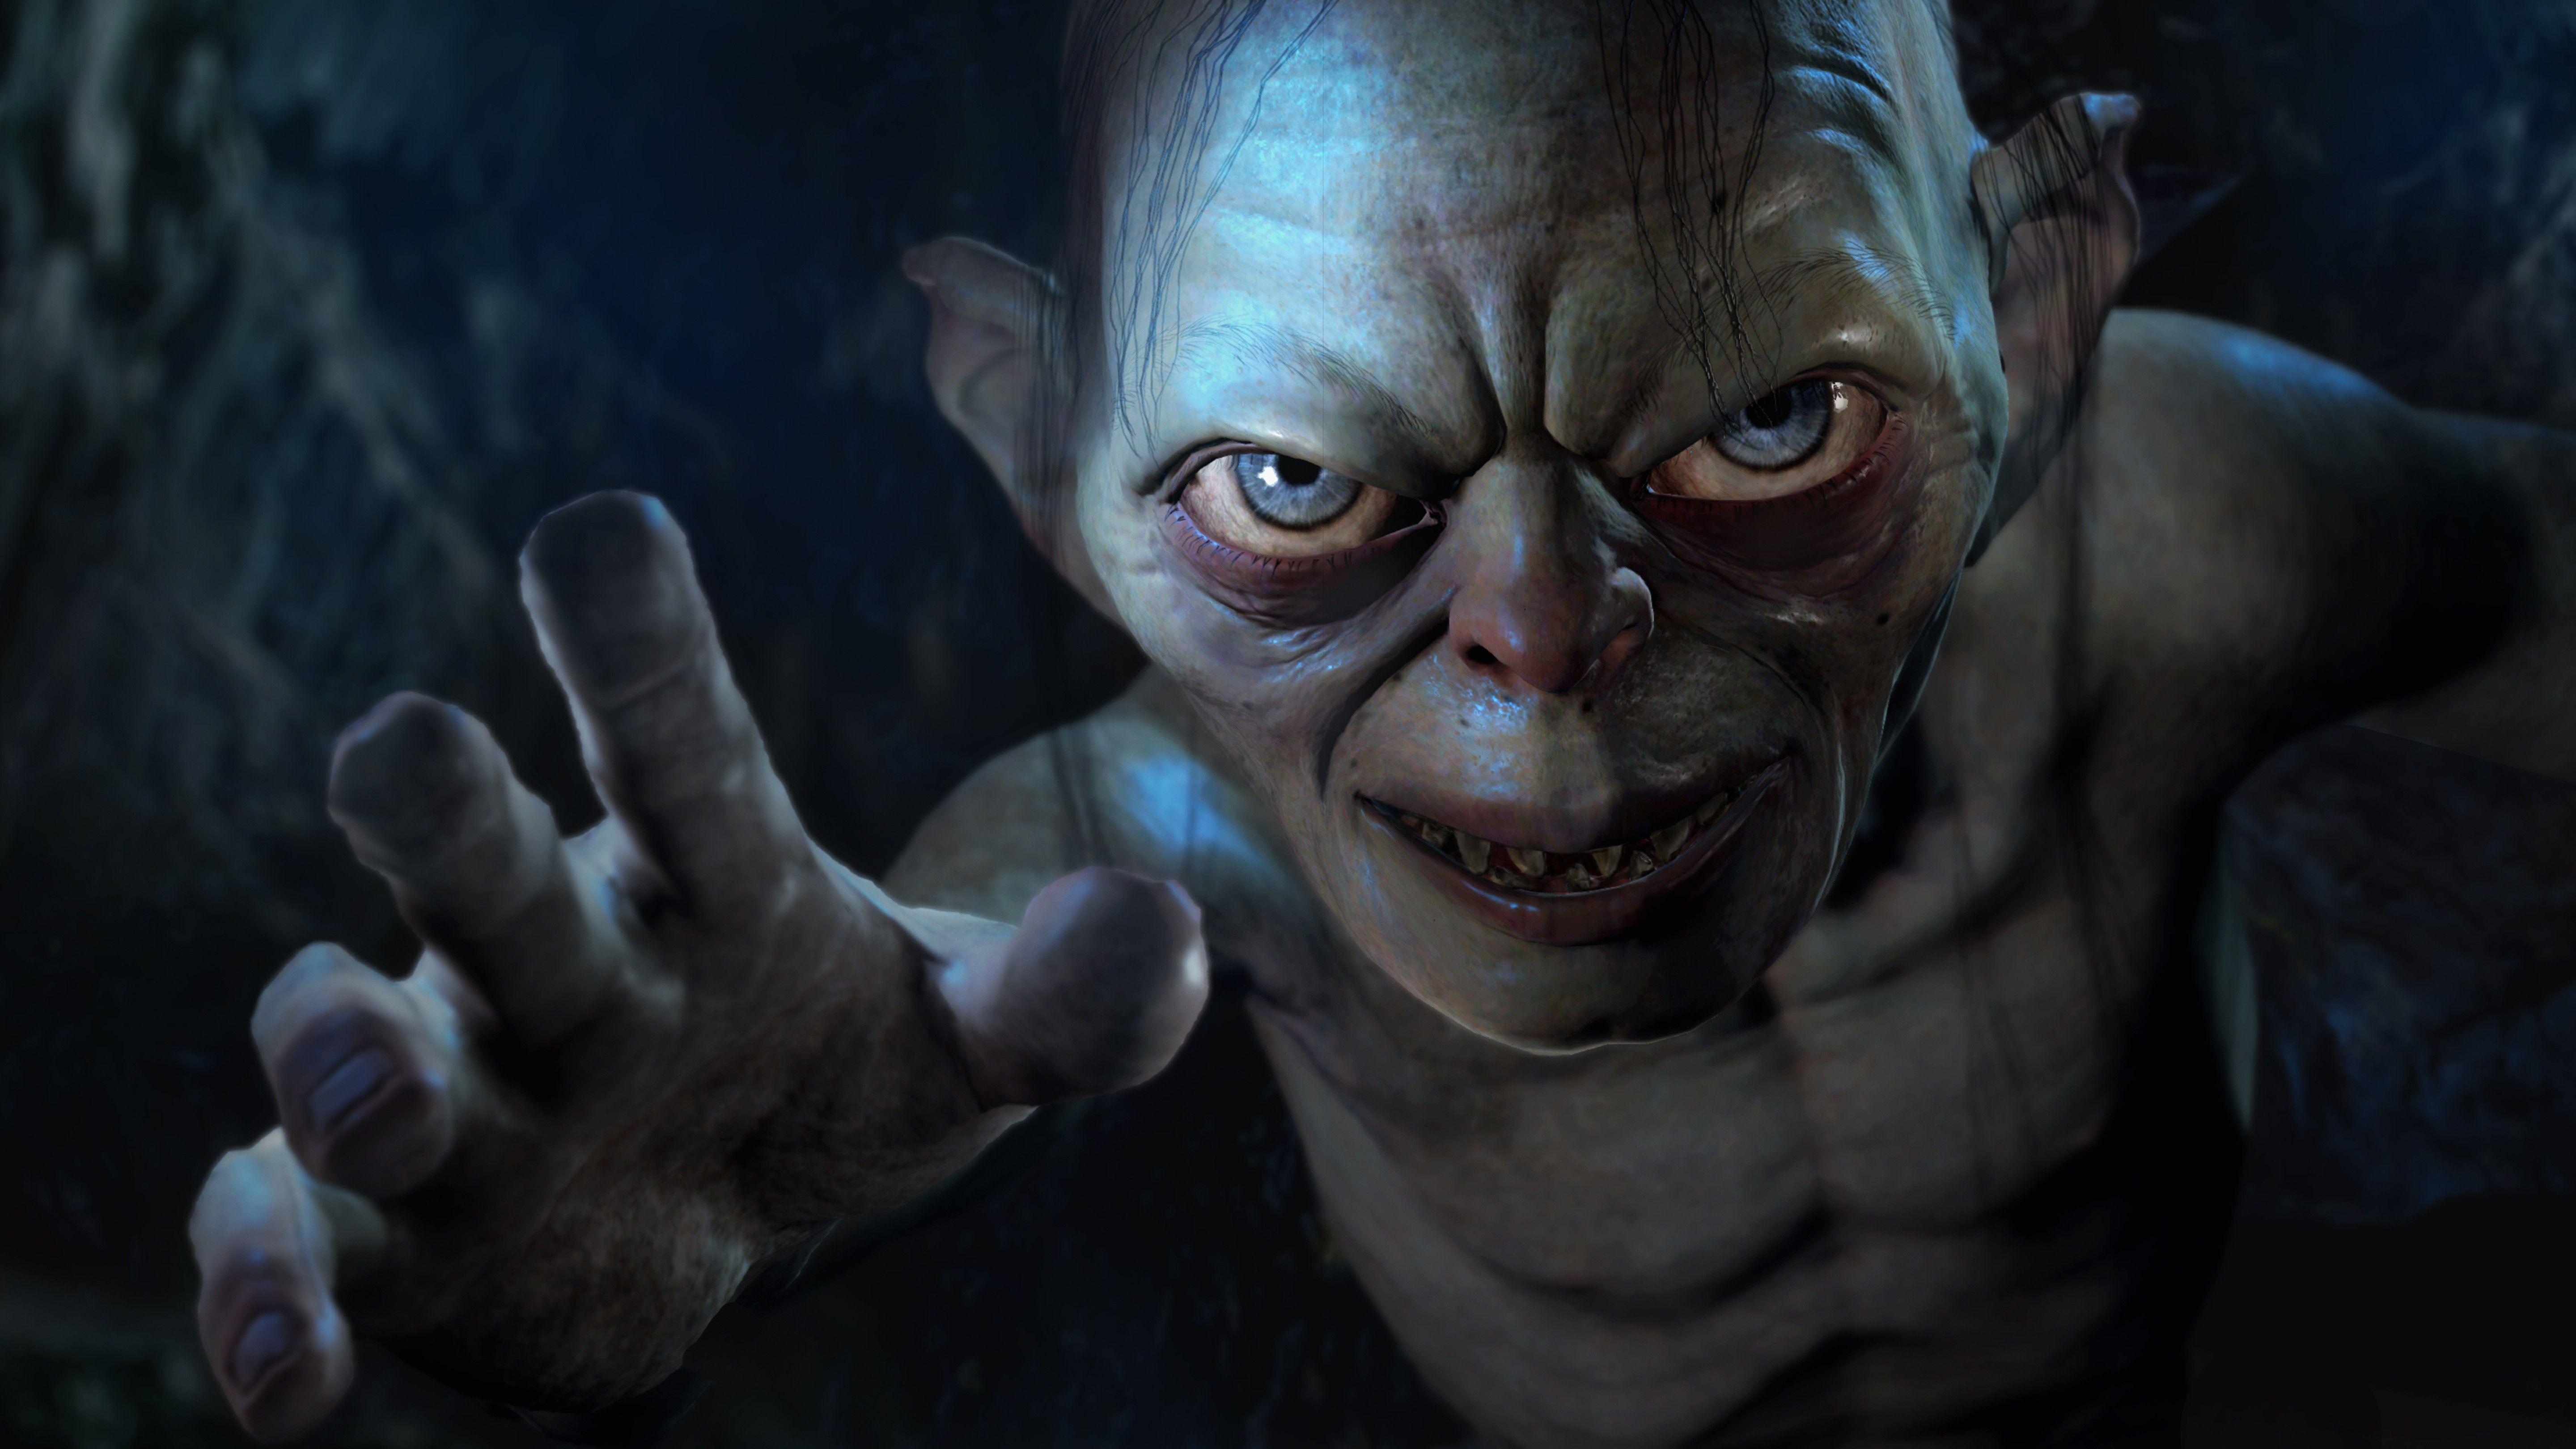 Gollum from the game Shadows of Mordor wallpaper and image